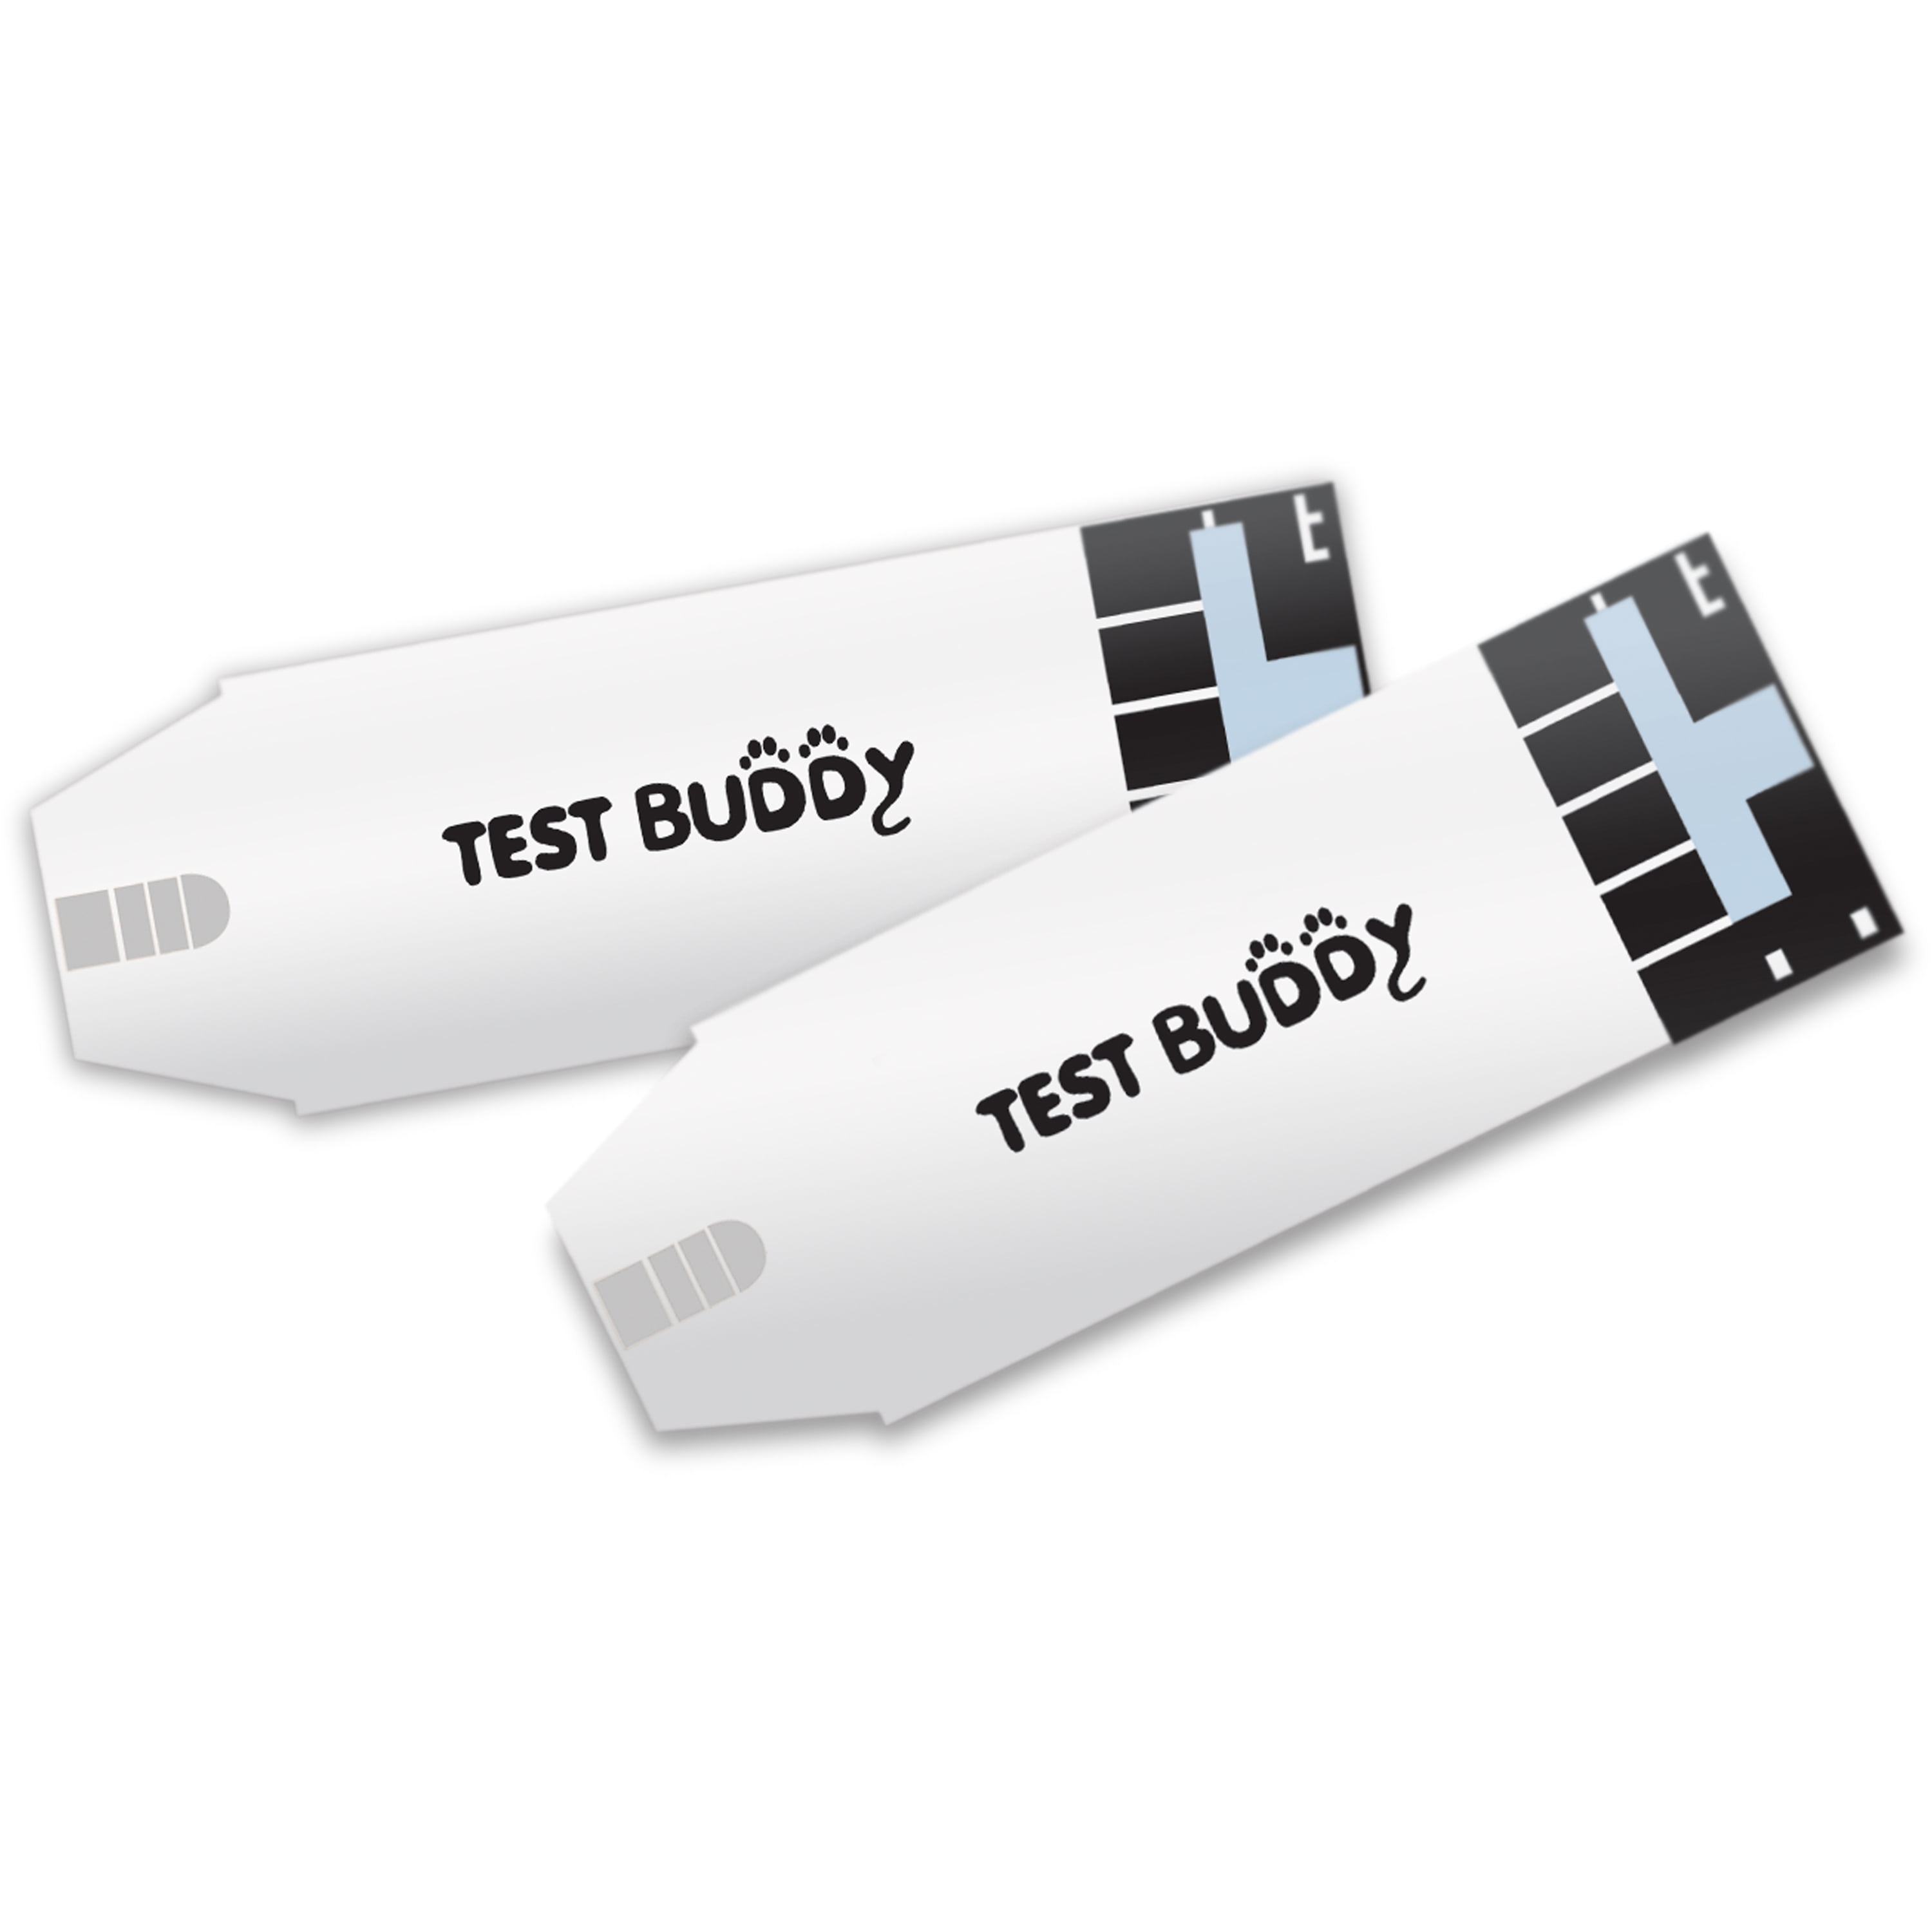 Test Buddy™ Pet-Monitoring Blood Glucose Meter Starter Kit for Dogs and  Cats 